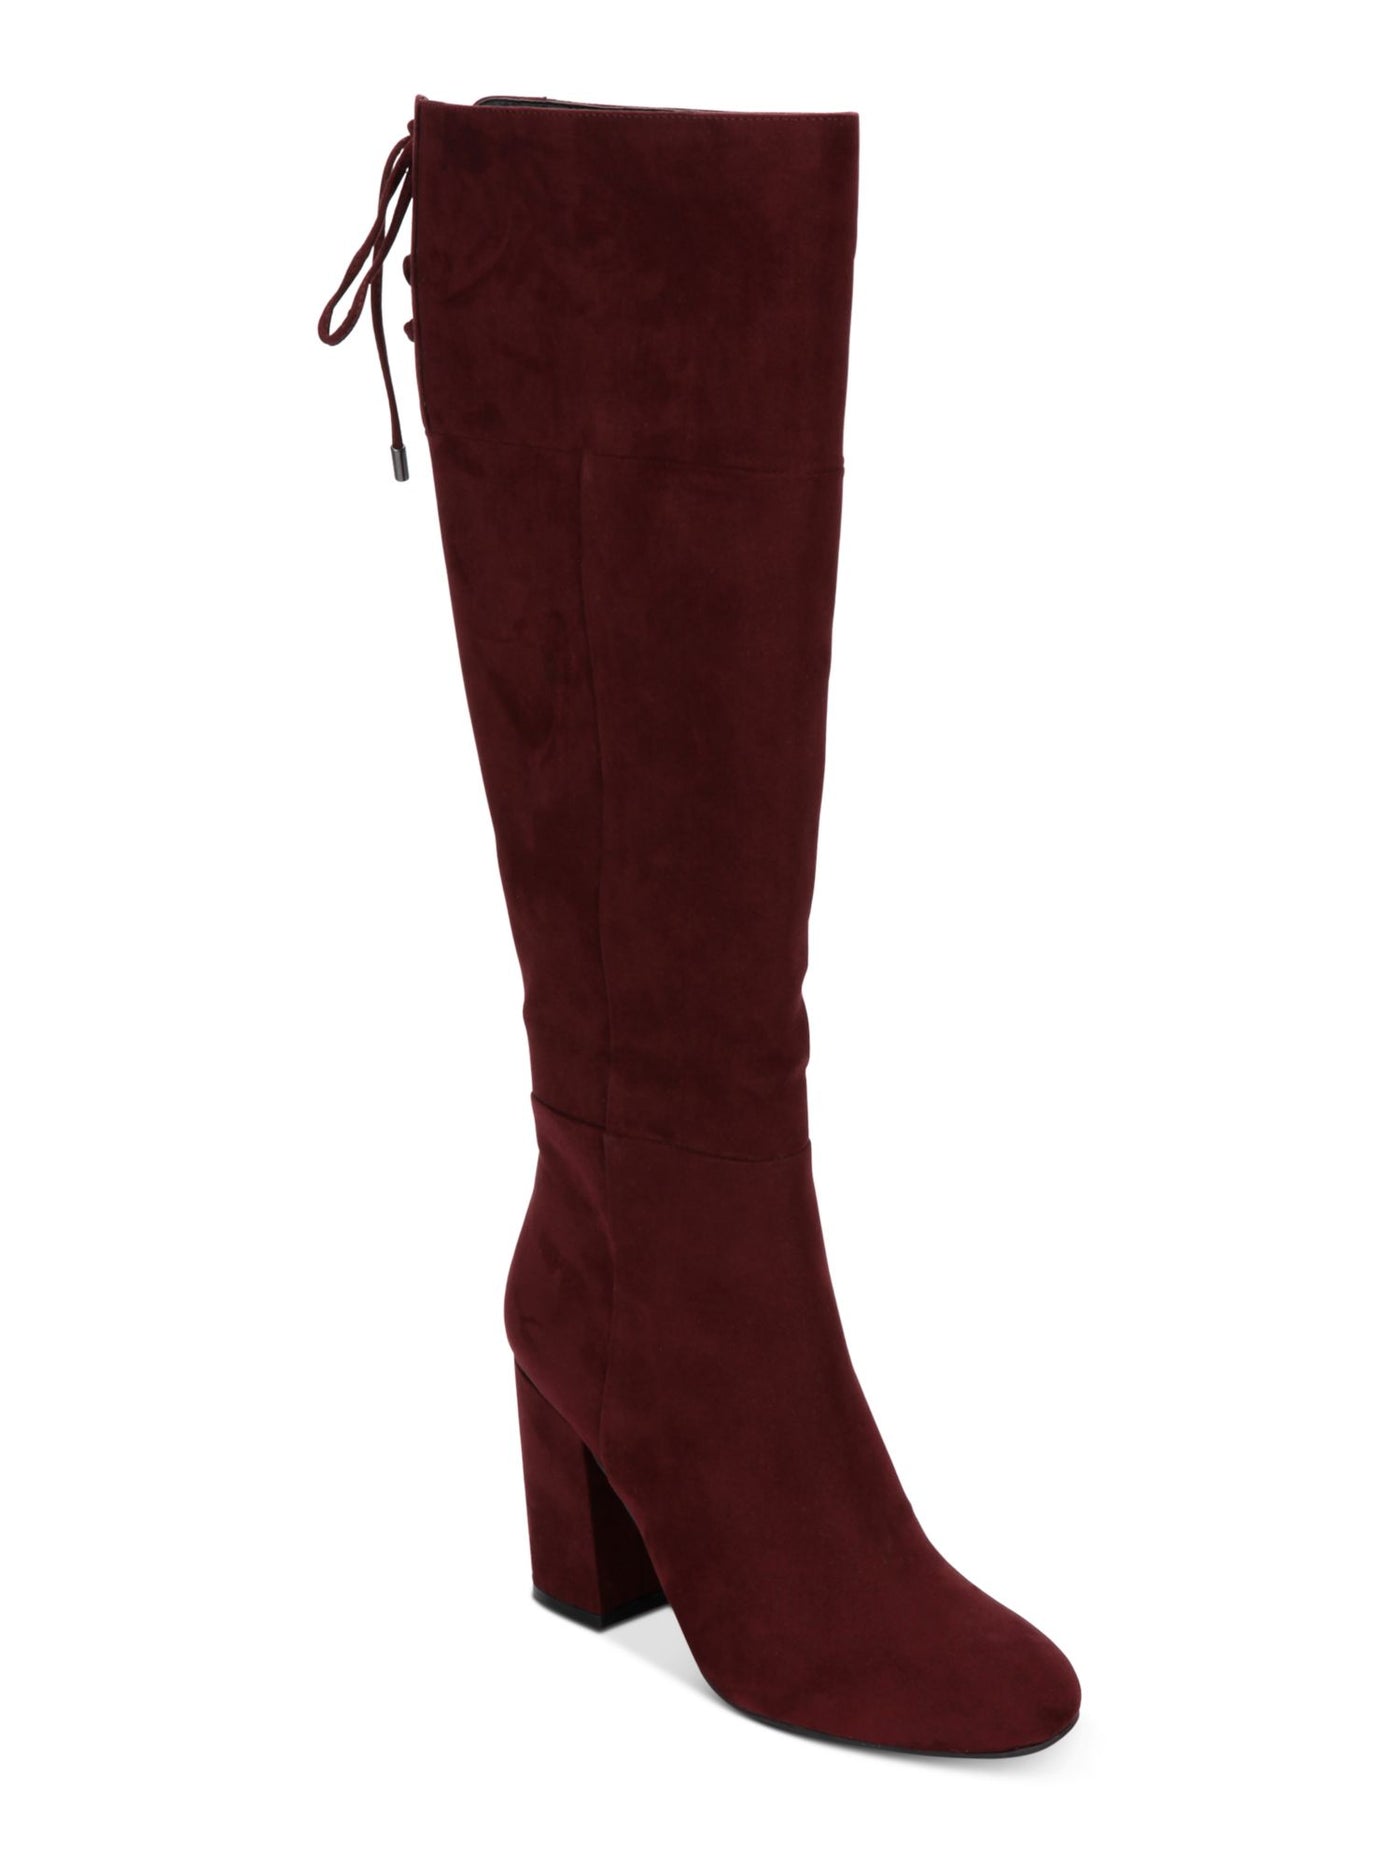 REACTION KENNETH COLE Womens Maroon Laced Detail Cushioned Corie Round Toe Block Heel Zip-Up Heeled Boots 8 M